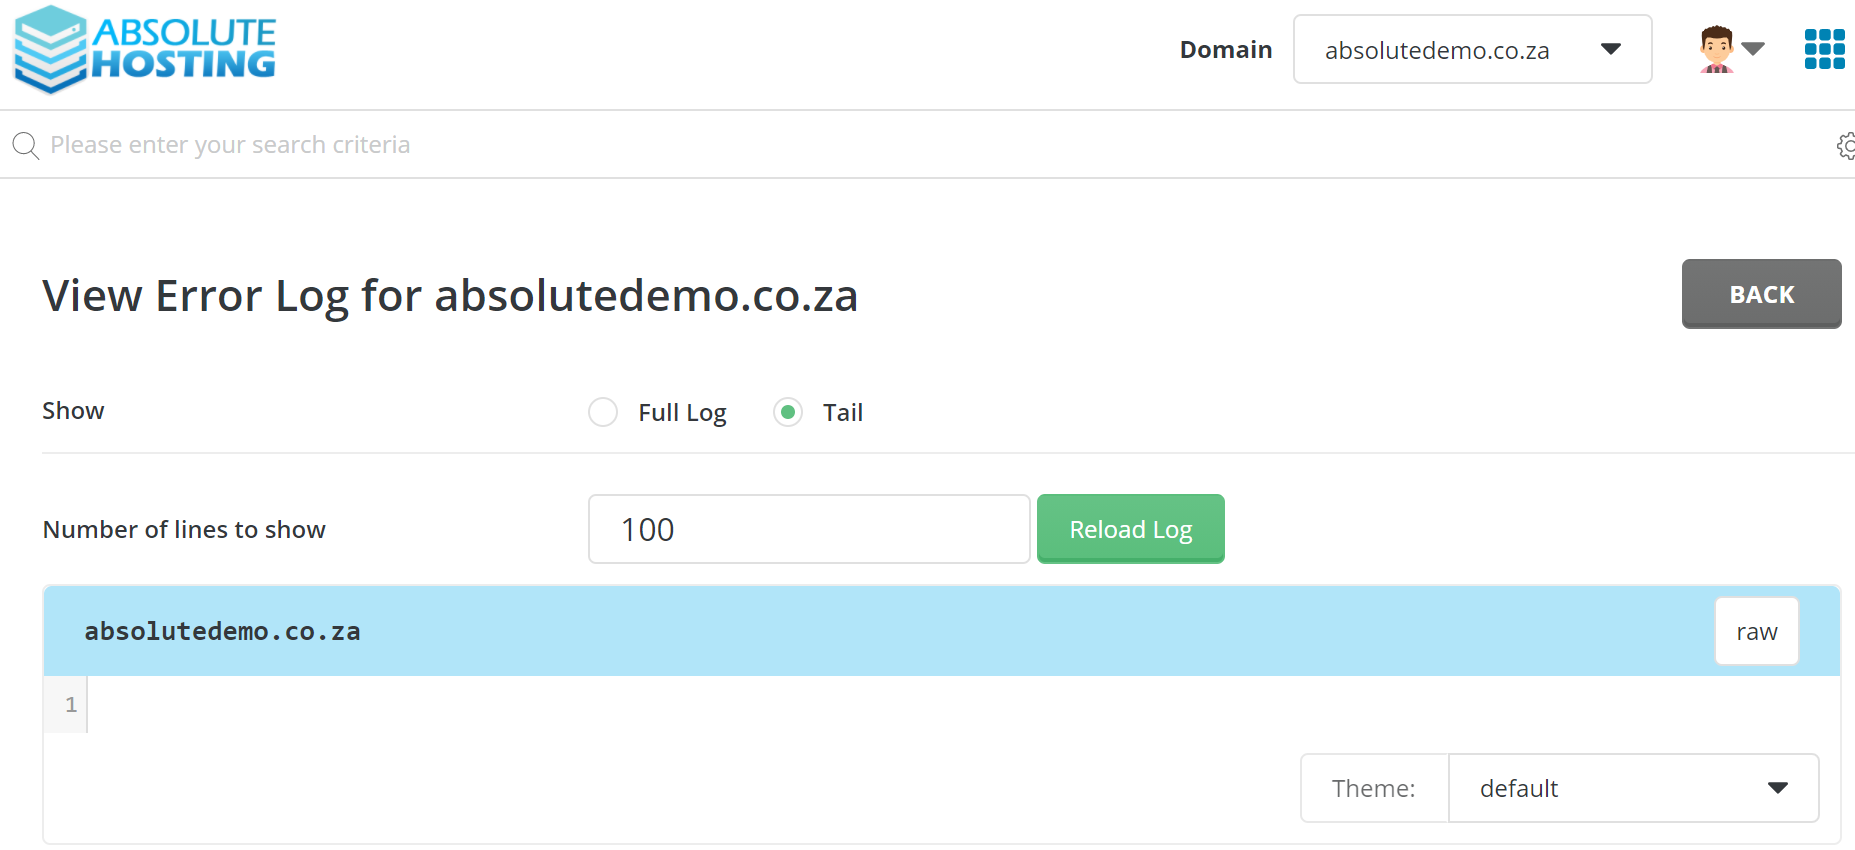 absolutehosting.co.za view error logs